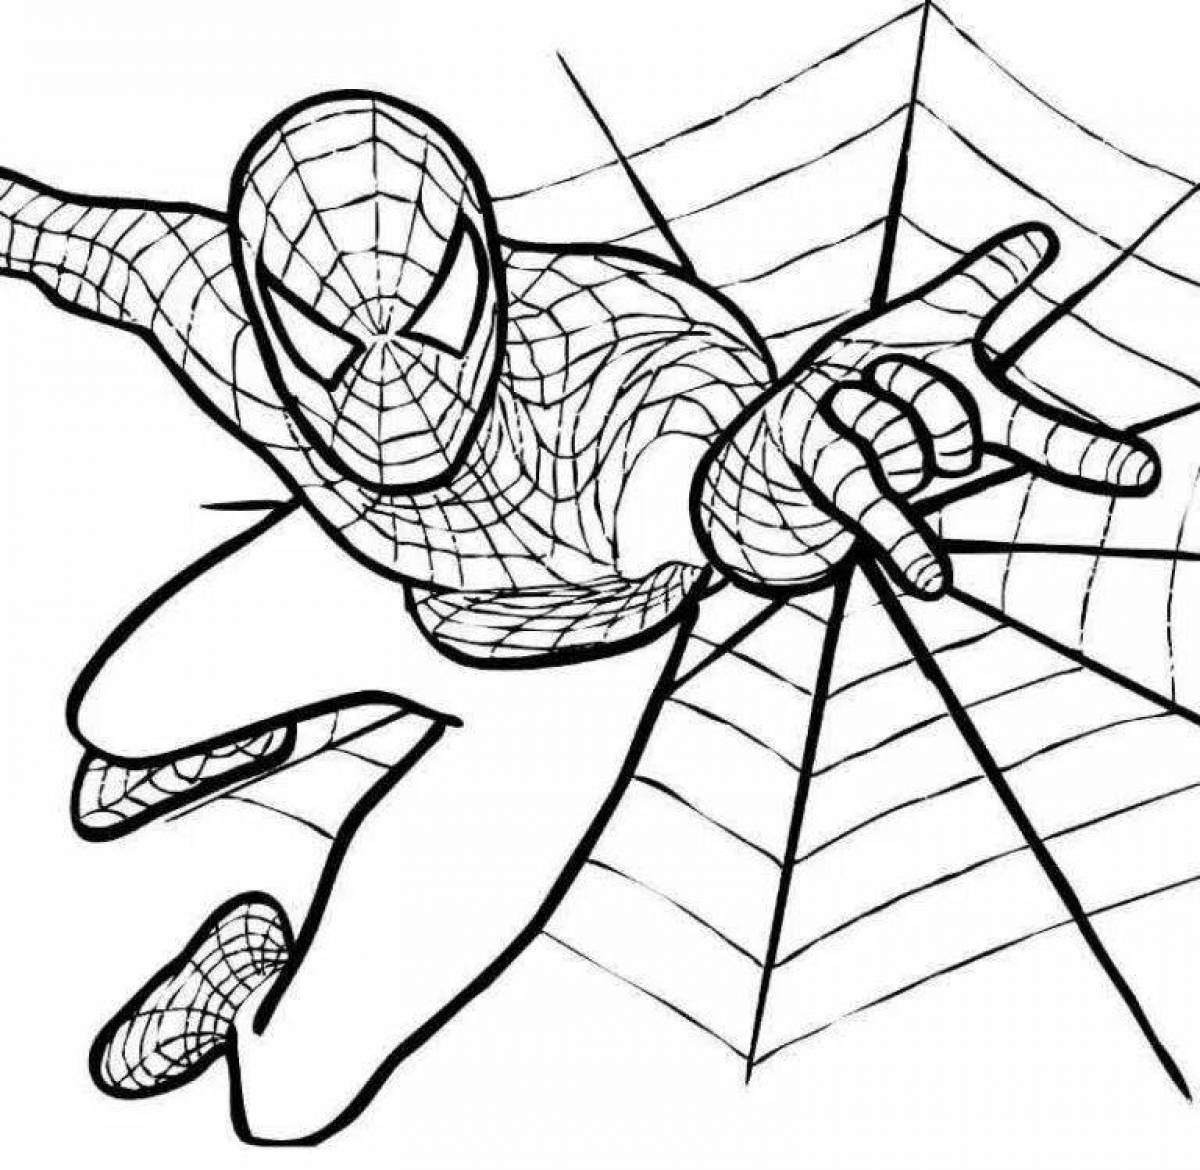 Spiderman adorable coloring game